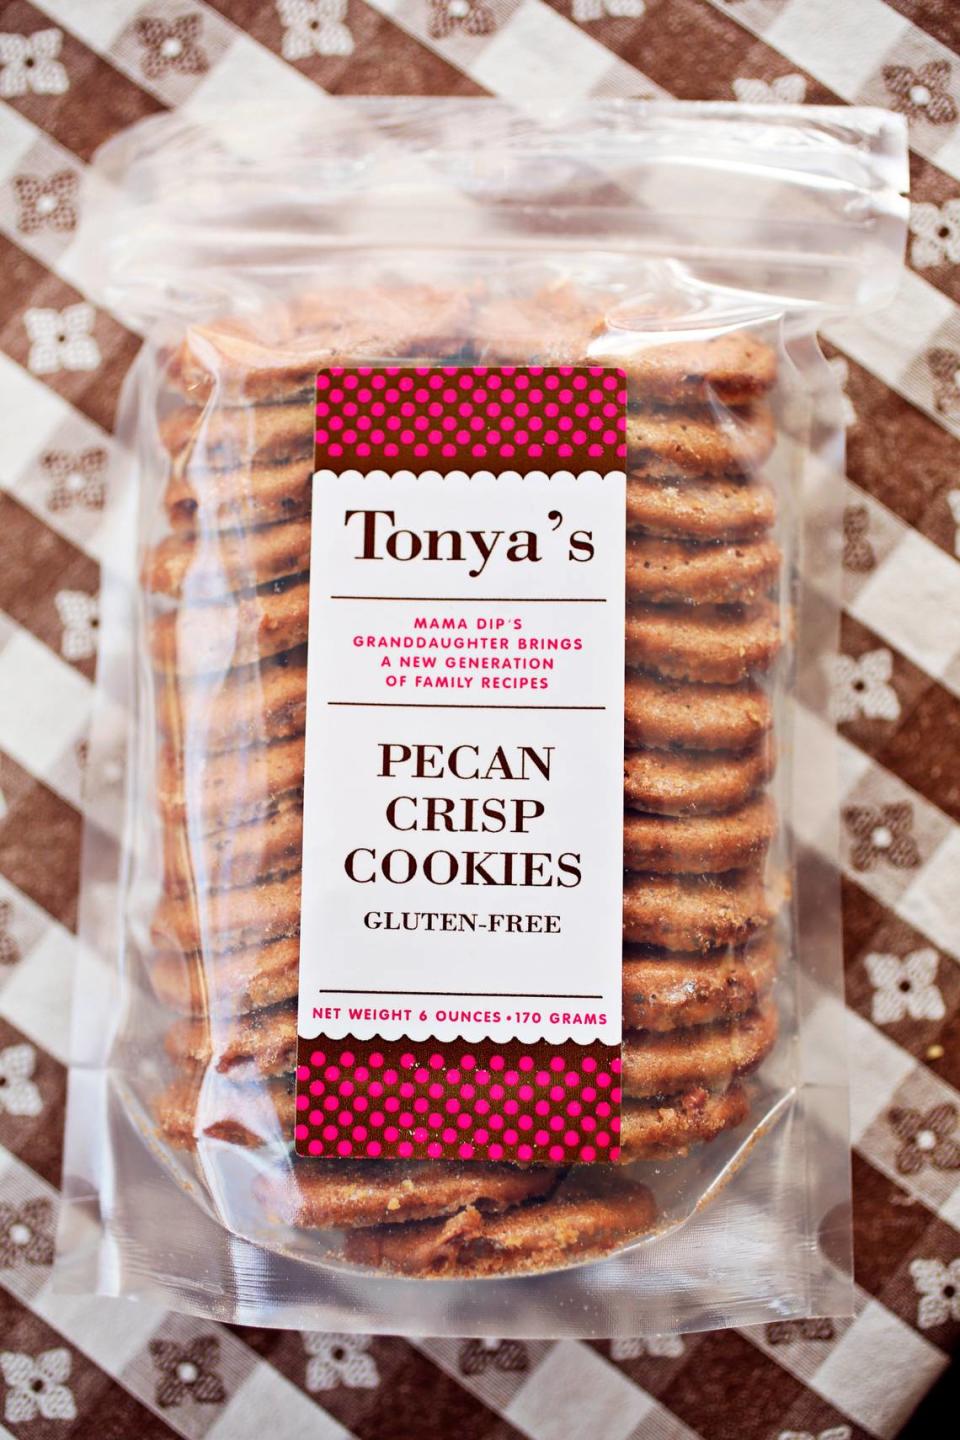 Tonya Council, granddaughter of Mildred “Mama Dip” Council, makes a pecan crisp cookie that’s been named one of Oprah’s Favorite Things for 2021.